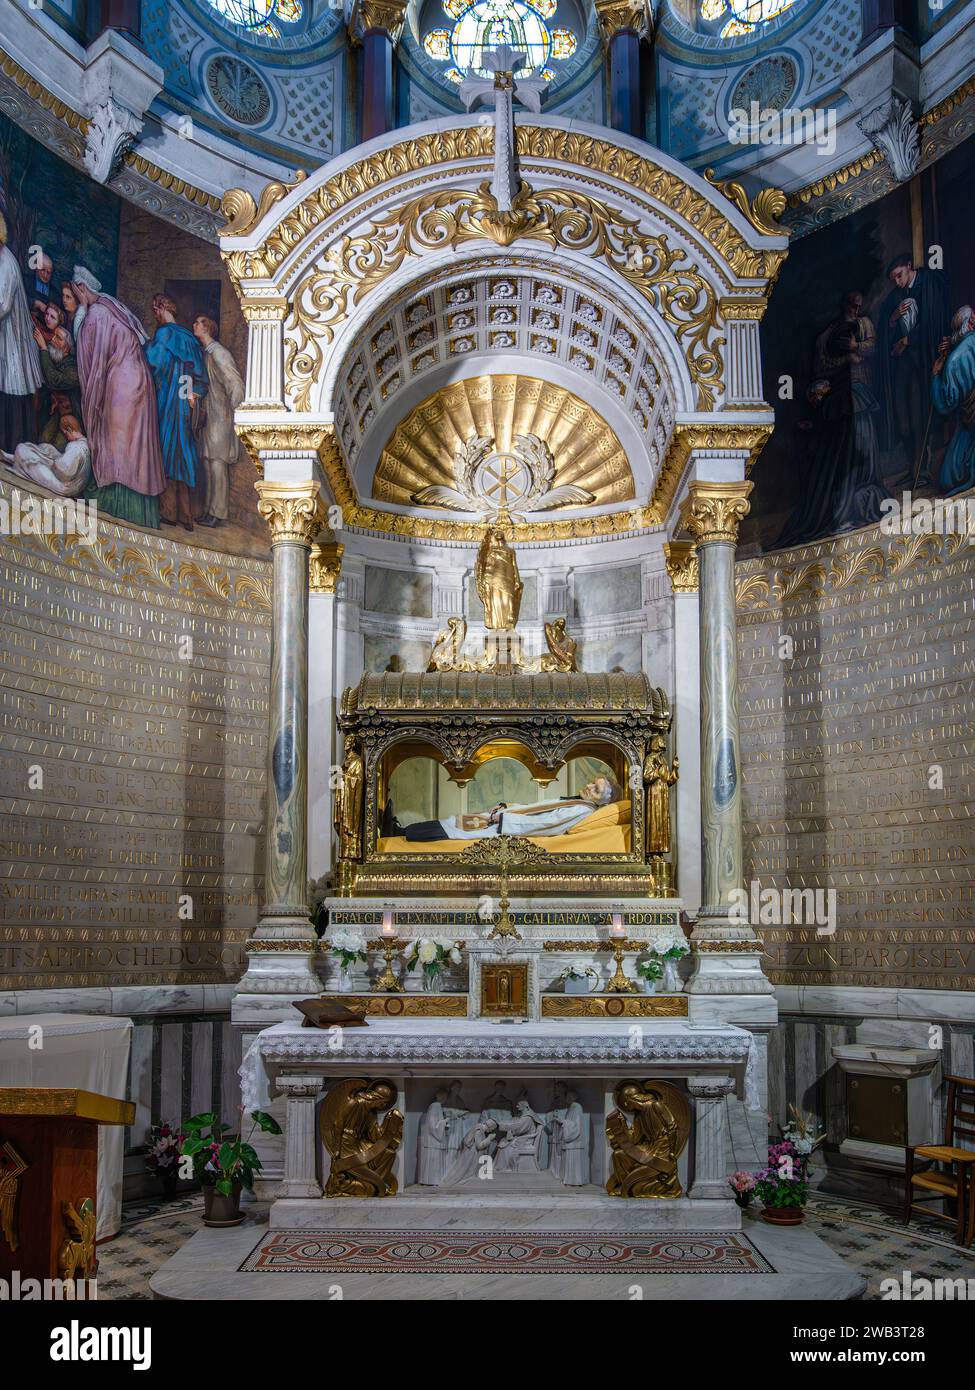 Ars sur Formans, France - October 13, 2023: The body of Saint John Mary Vianney, entombed above the main altar in the Basilica at Ars, France. The fac Stock Photo